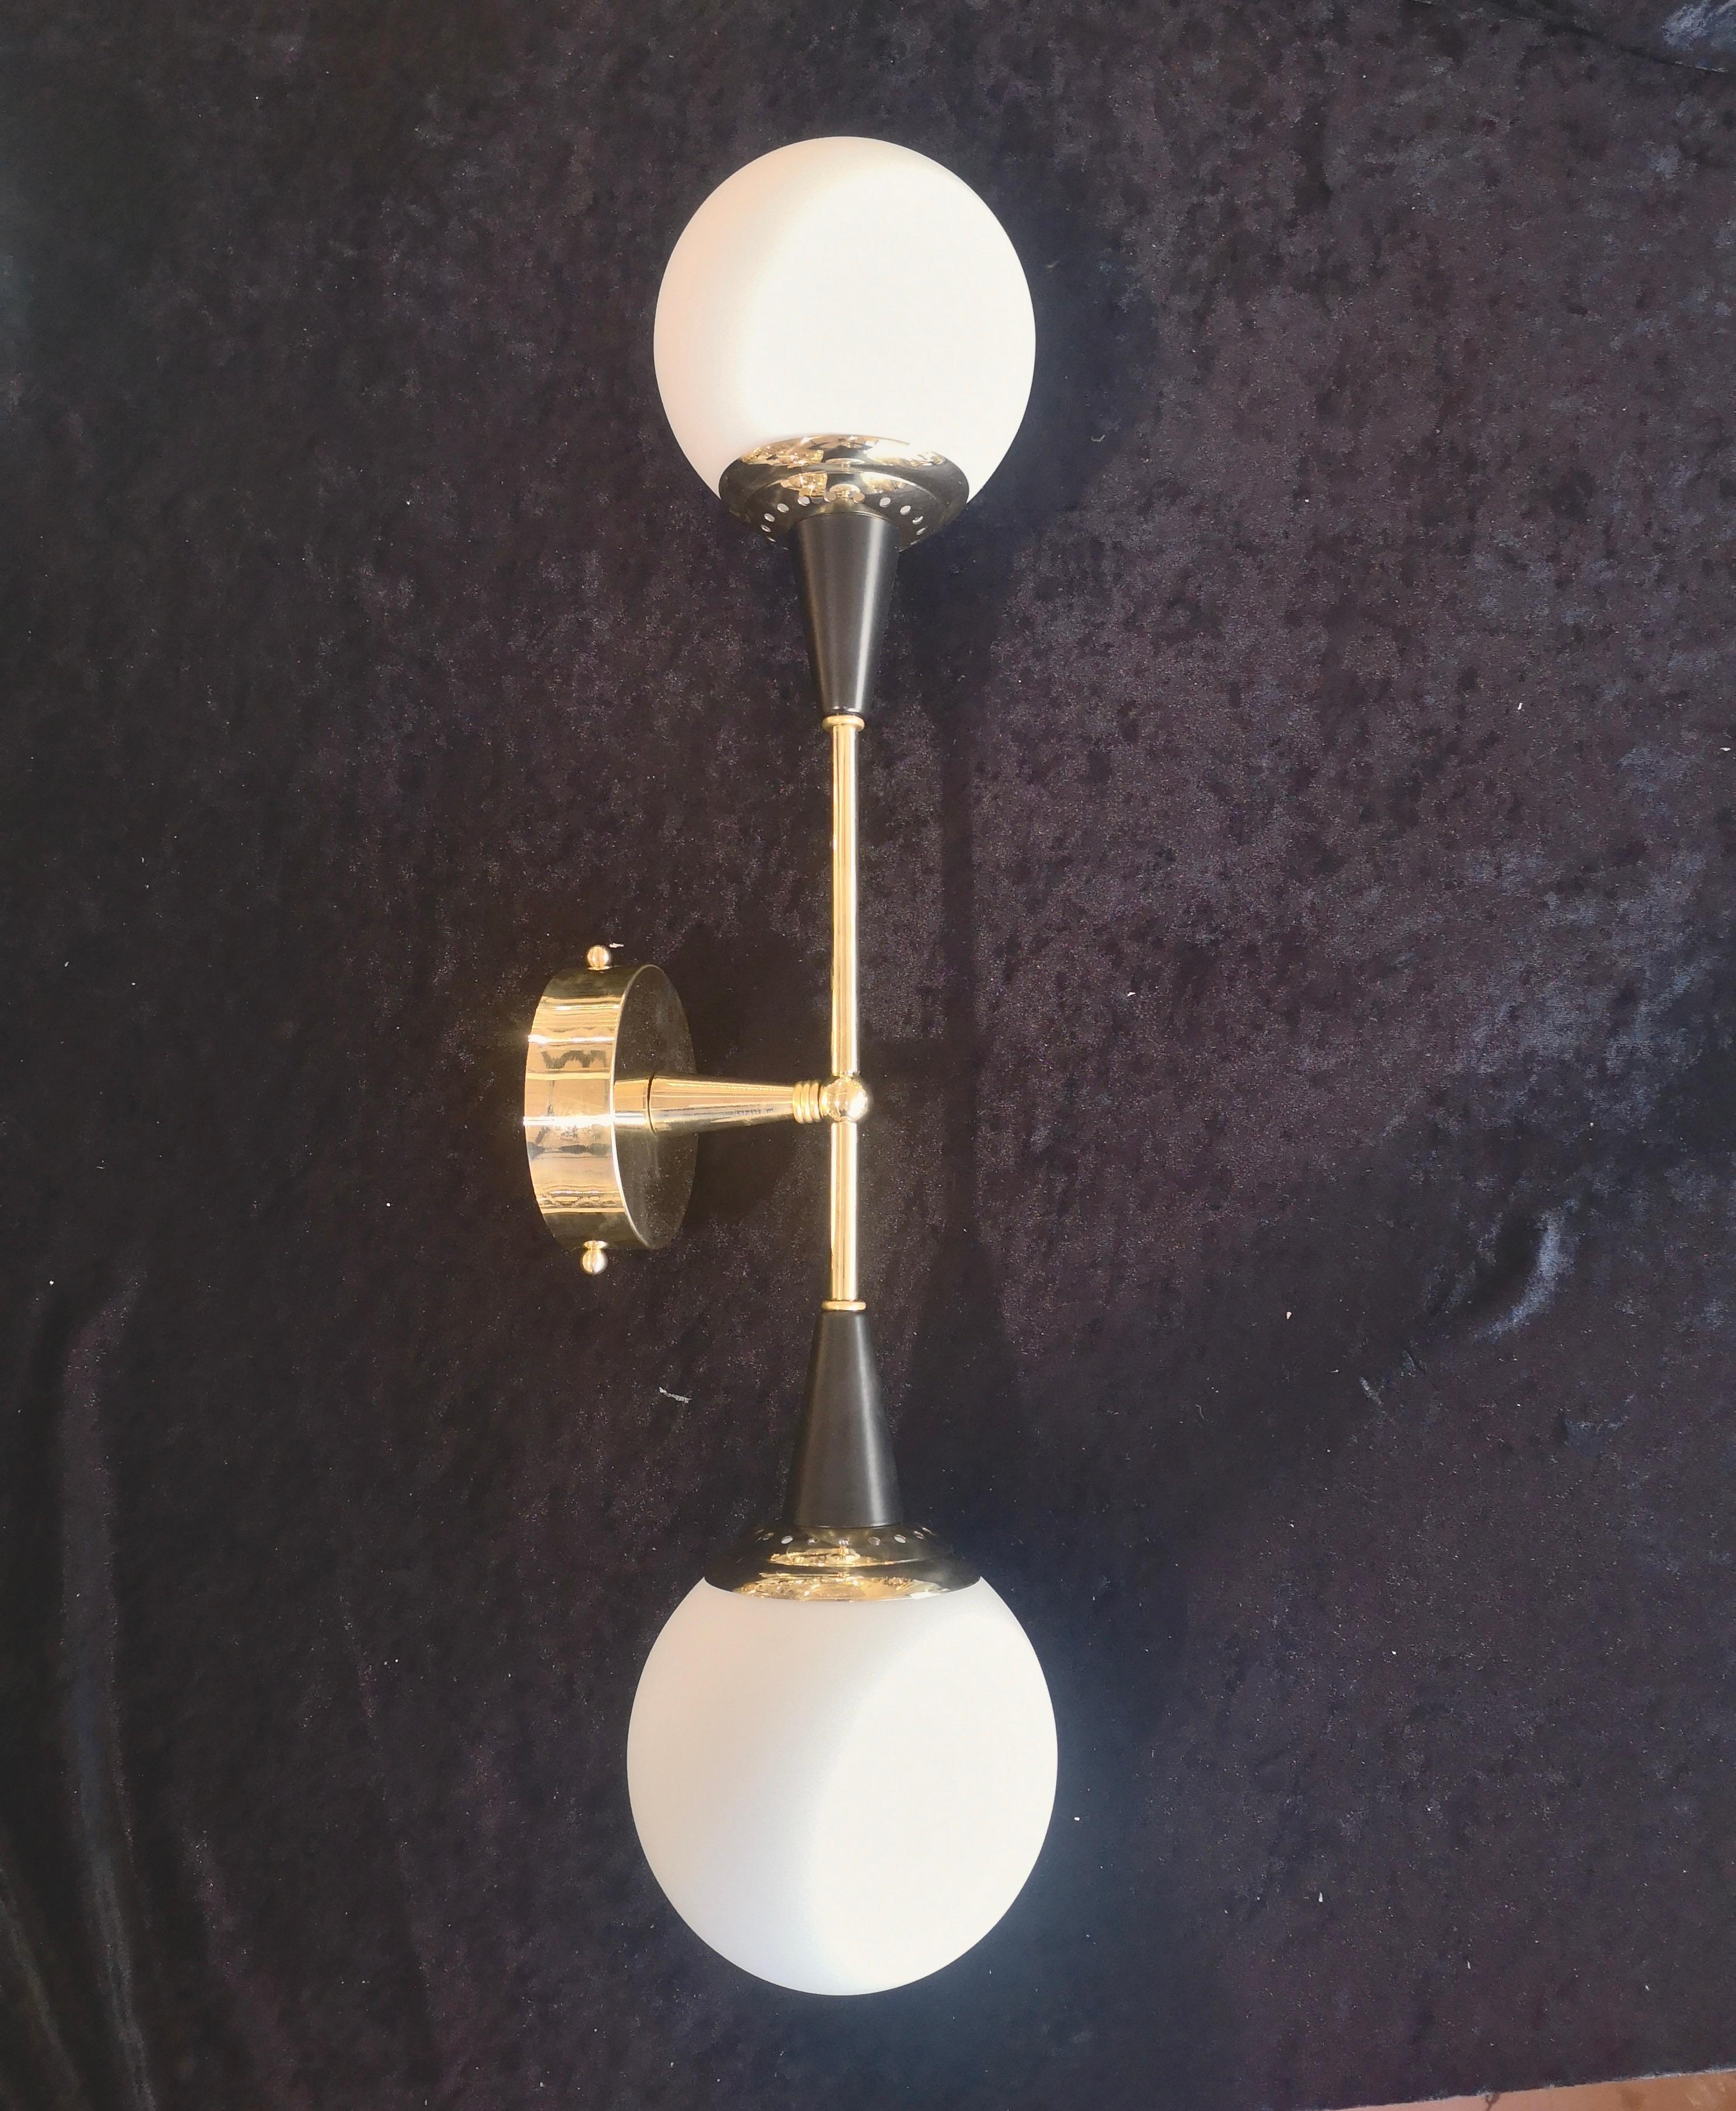 Refined and delicate design for this wall light with white Murano glass.

The applique are formed by a brass structure that allows the superimposed housing of two beautiful white Murano glass spheres. The design is very clean and simple, but at the